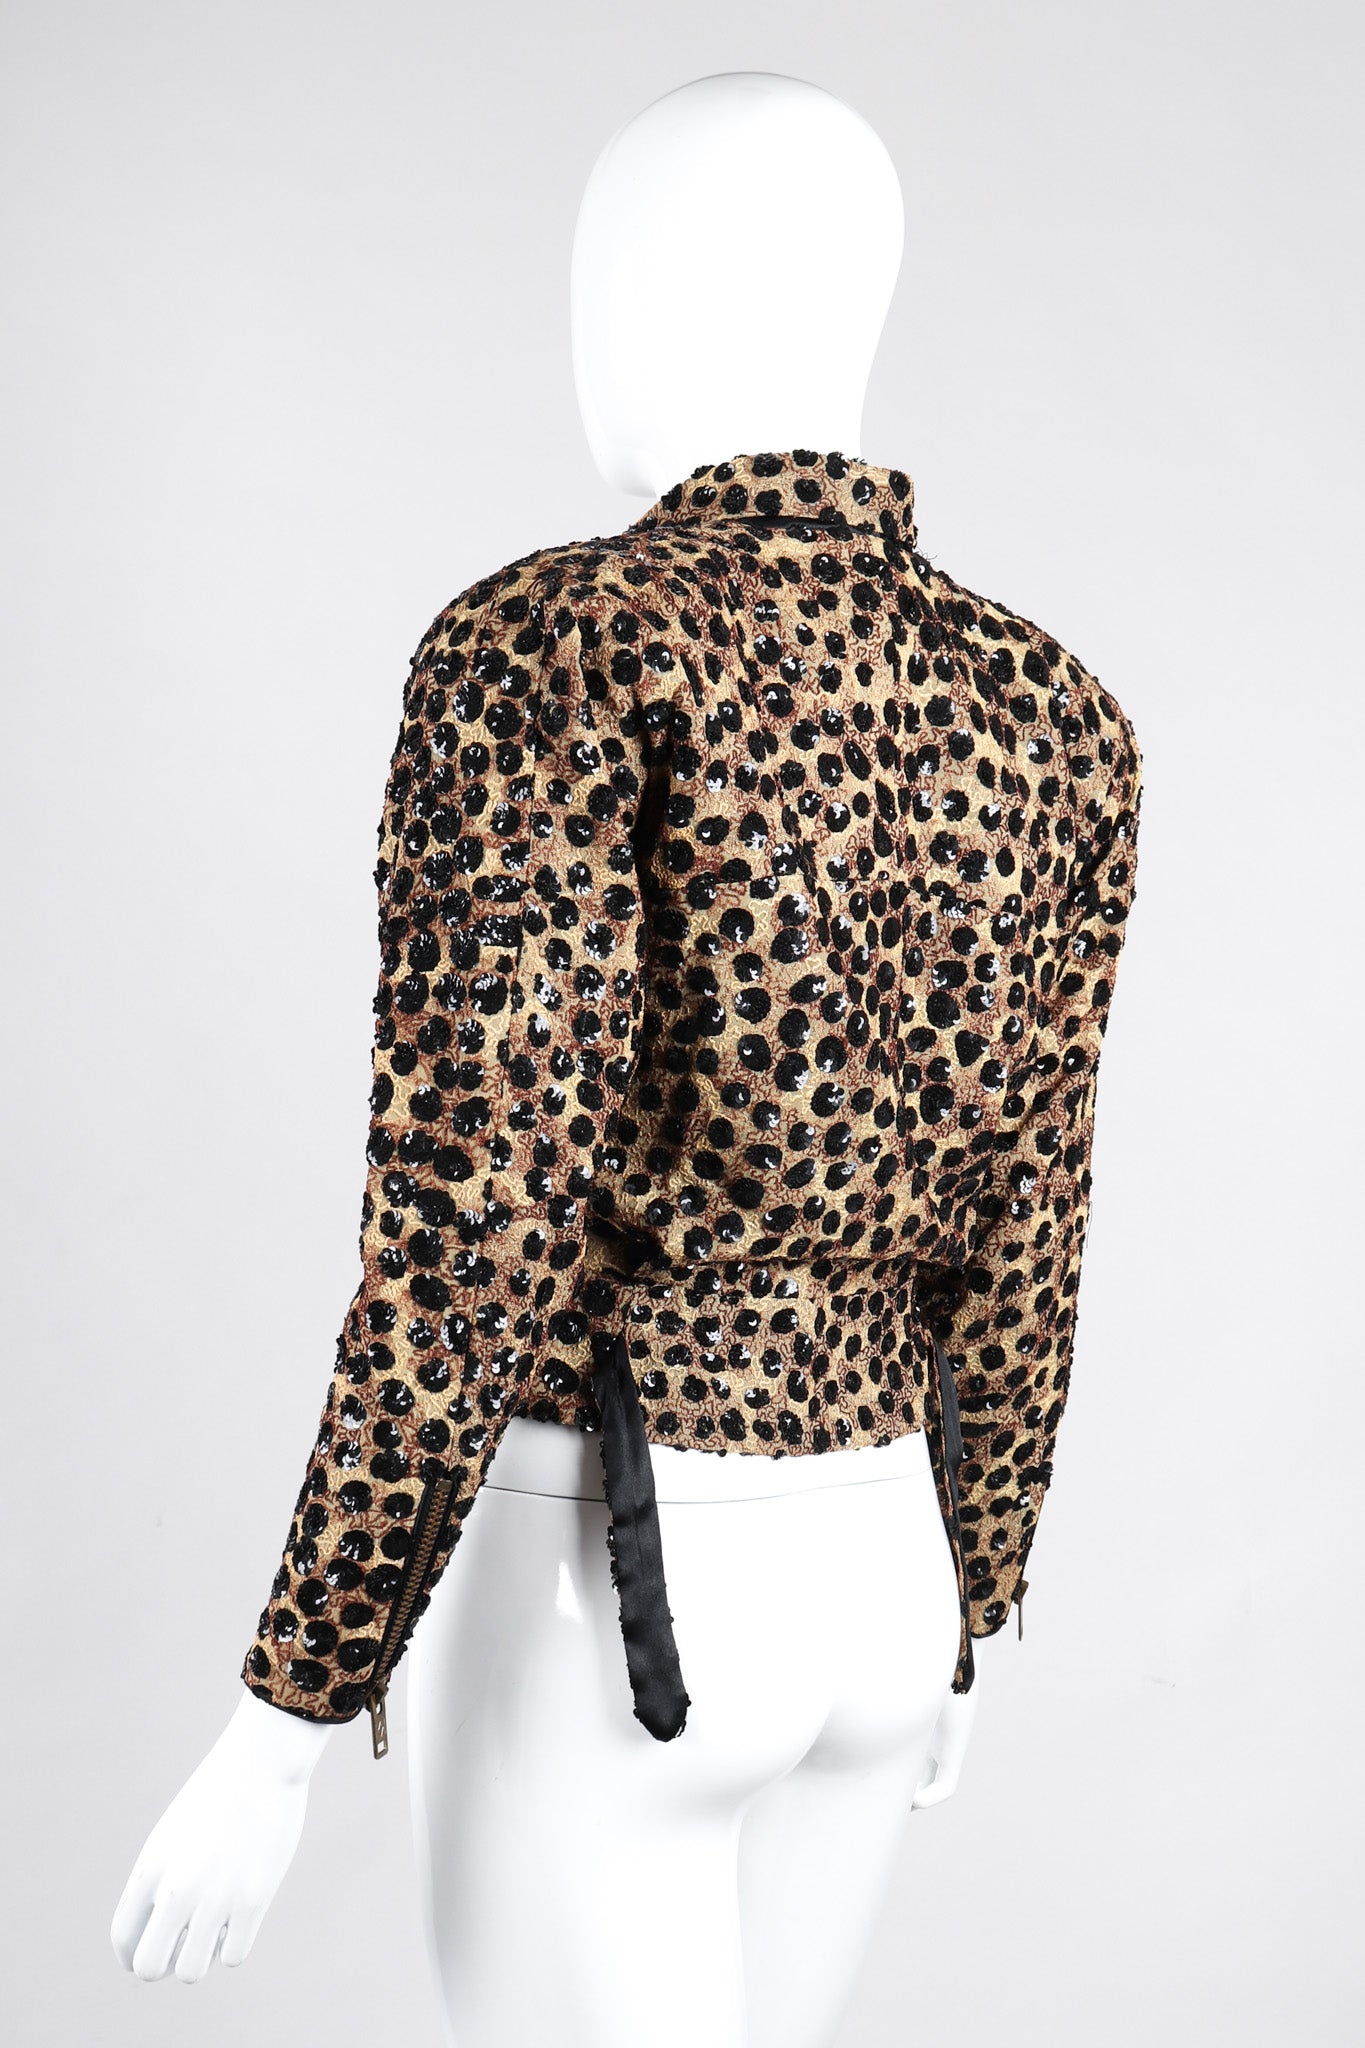 Recess Los Angeles Vintage Jeanette St Martin Cheetah Leopard Sequins Squiggly Embroidery Zip Up Motorcycle Jacket